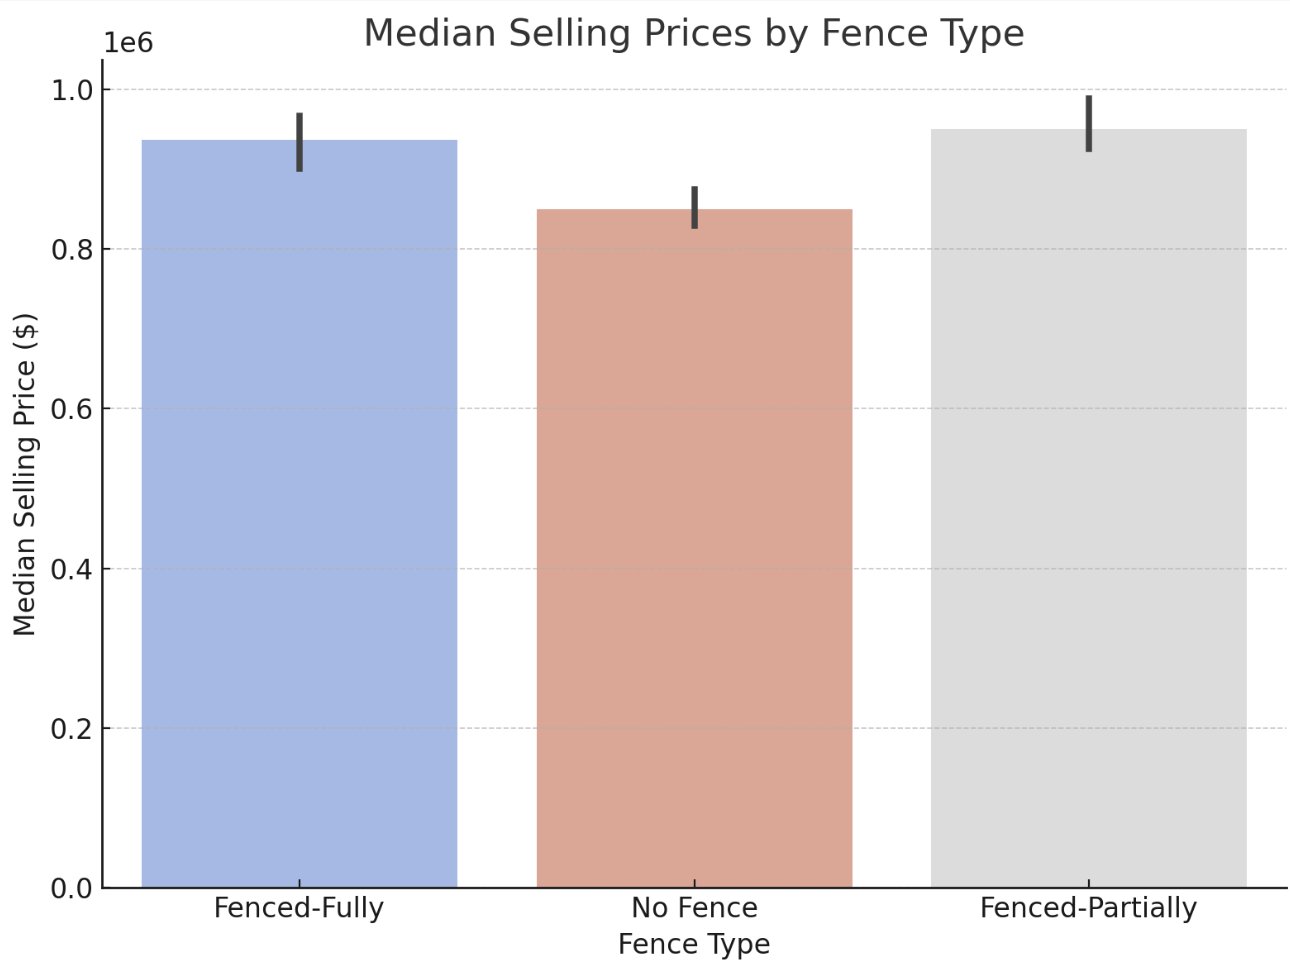 Bar chart showing the median selling prices by fence type